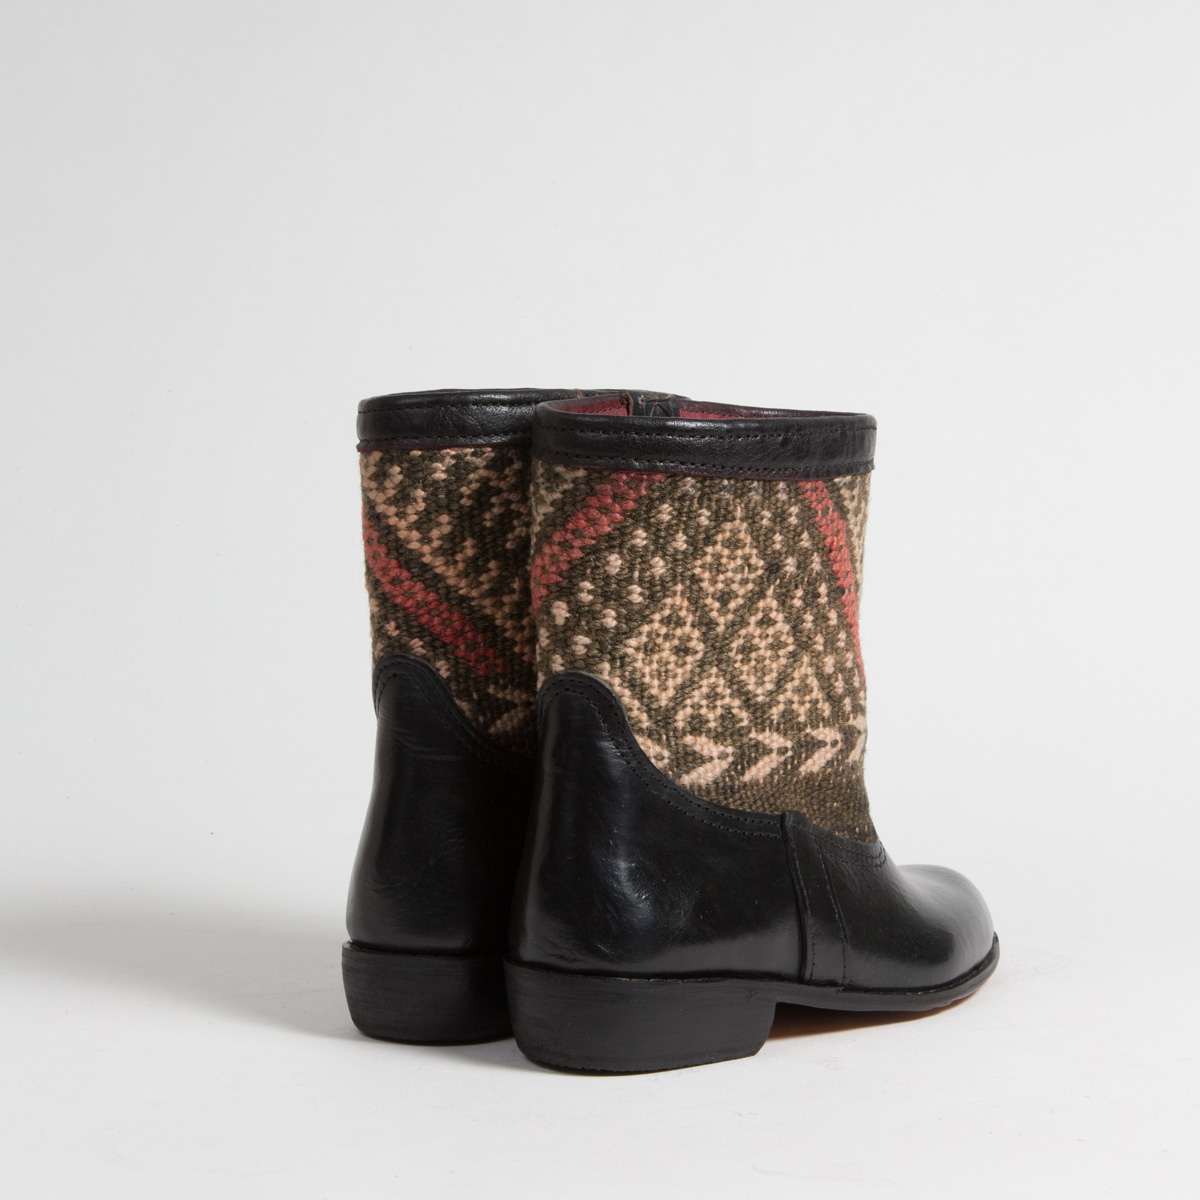 Bottines Kilim cuir mababouche artisanales (Réf. RPN12-38)